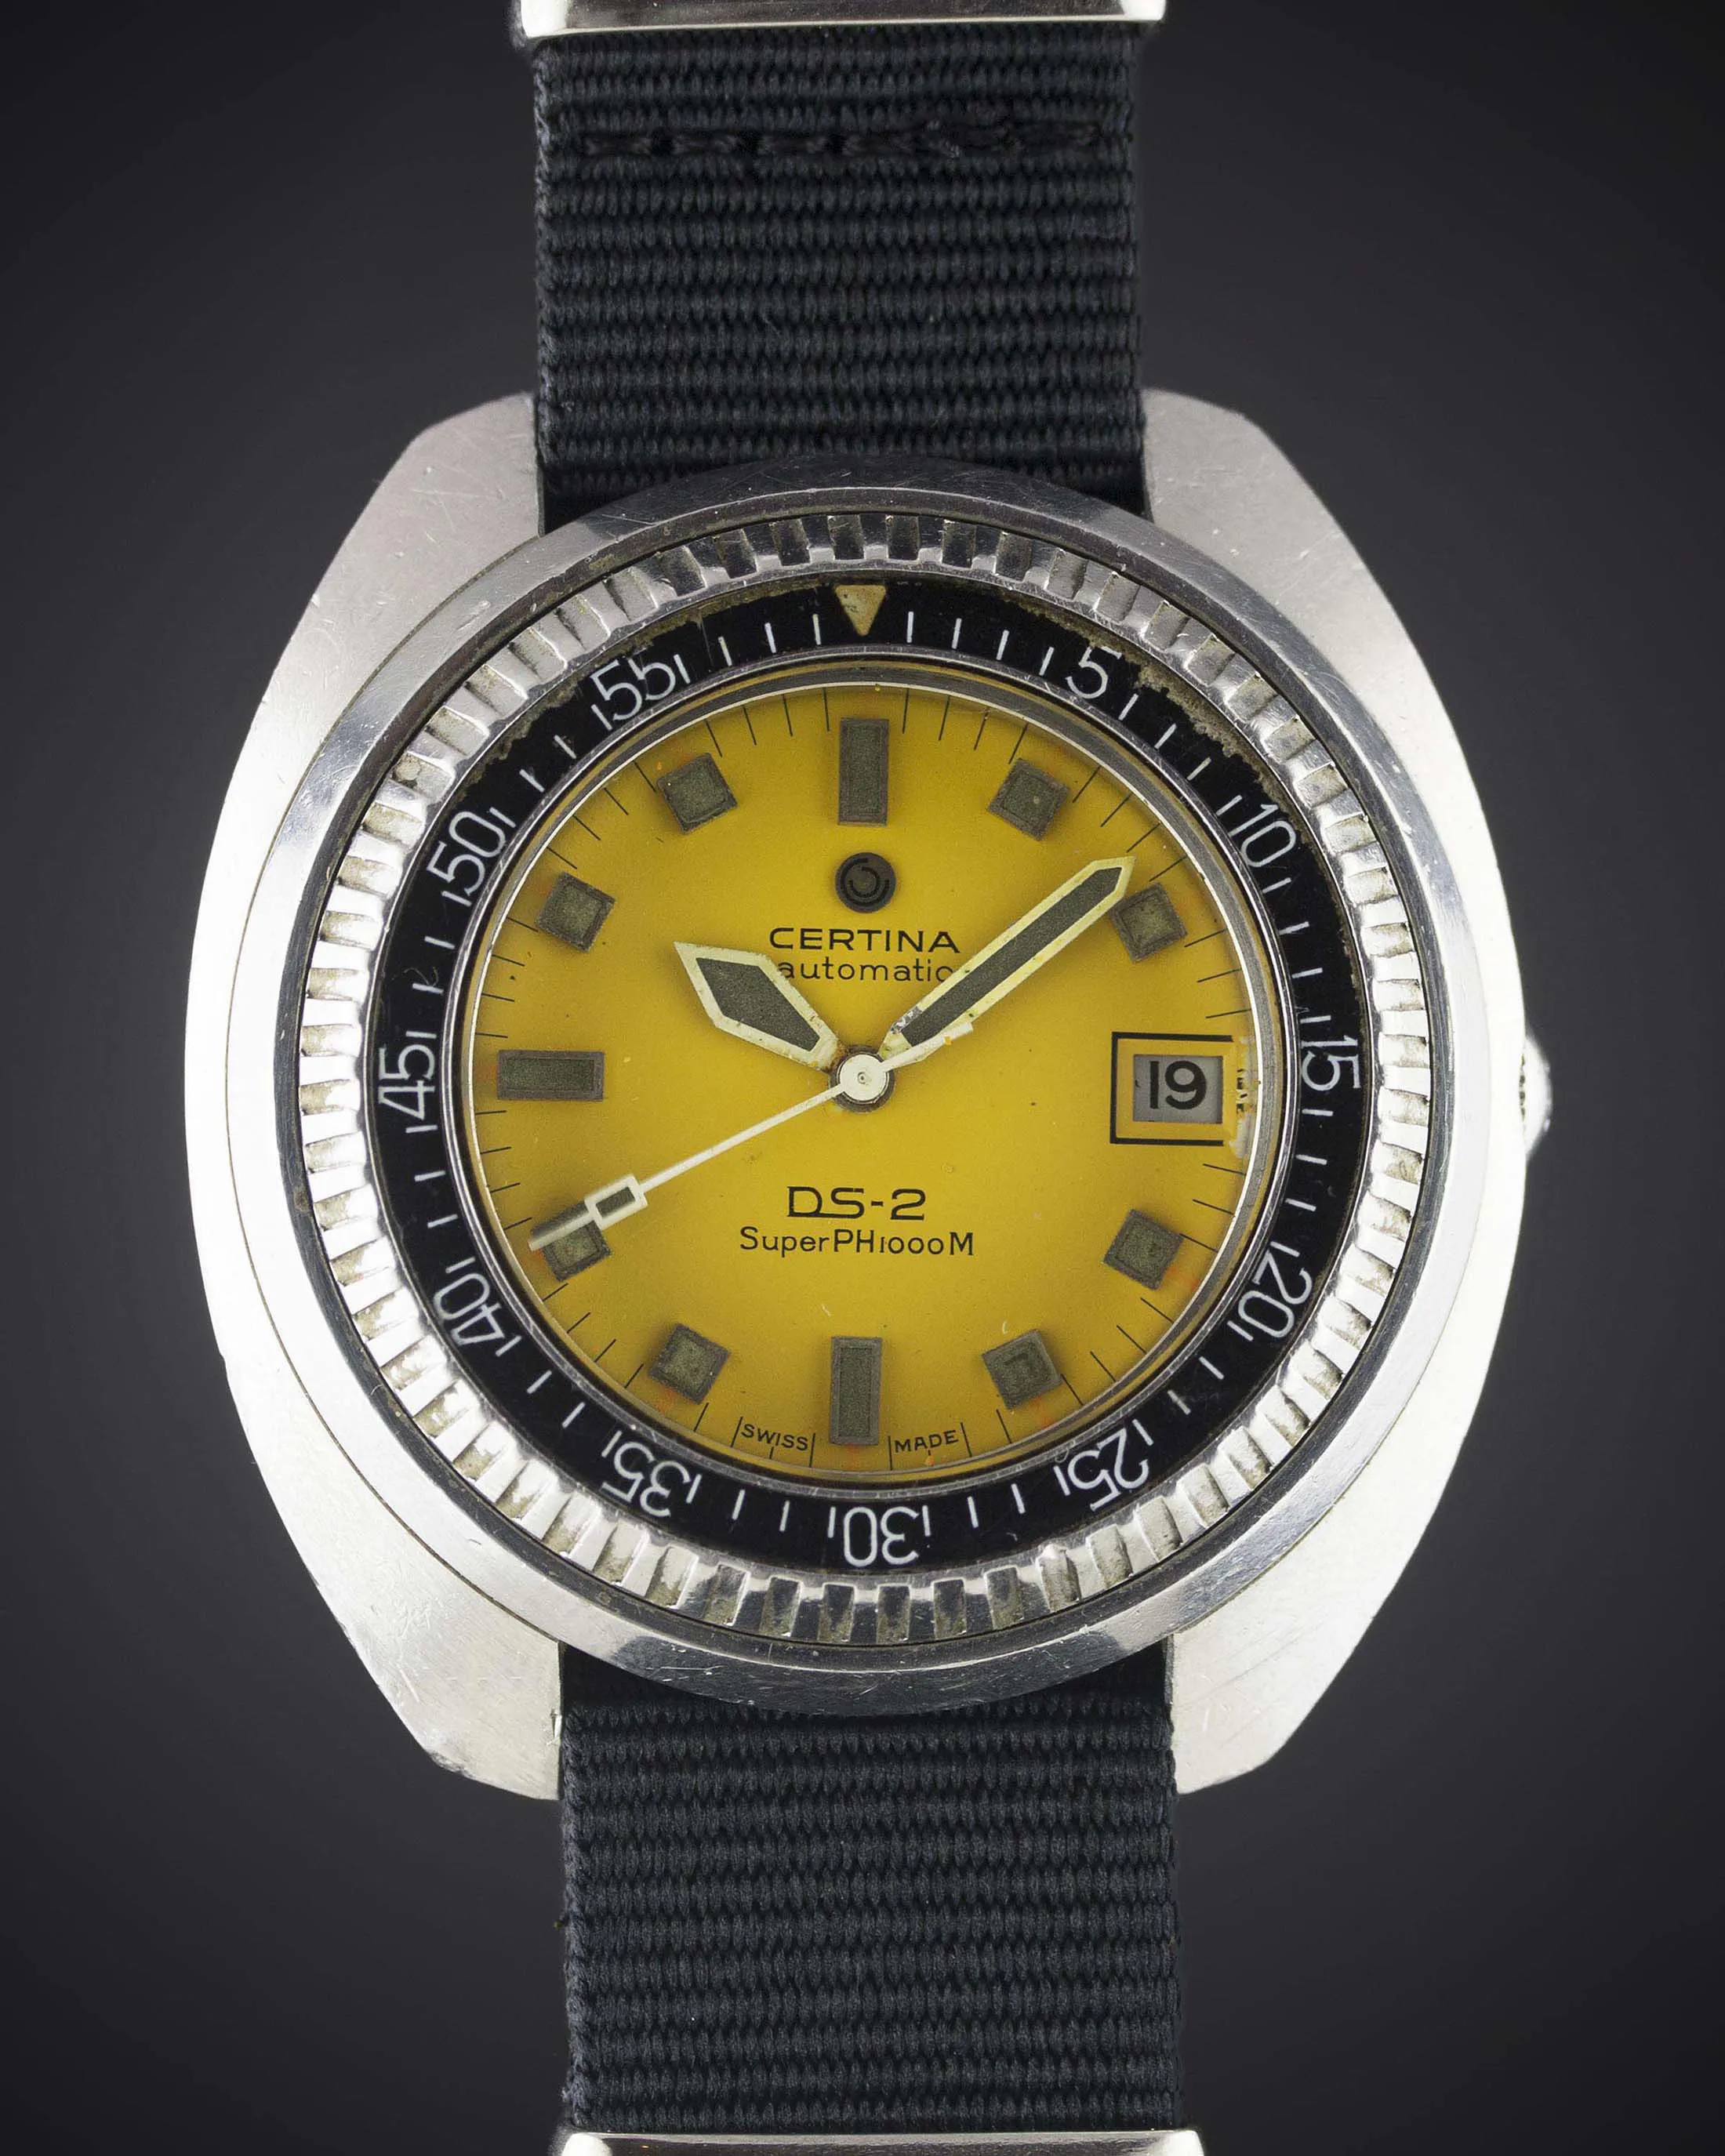 Certina DS-2 5801 302 45mm Stainless steel Yellow